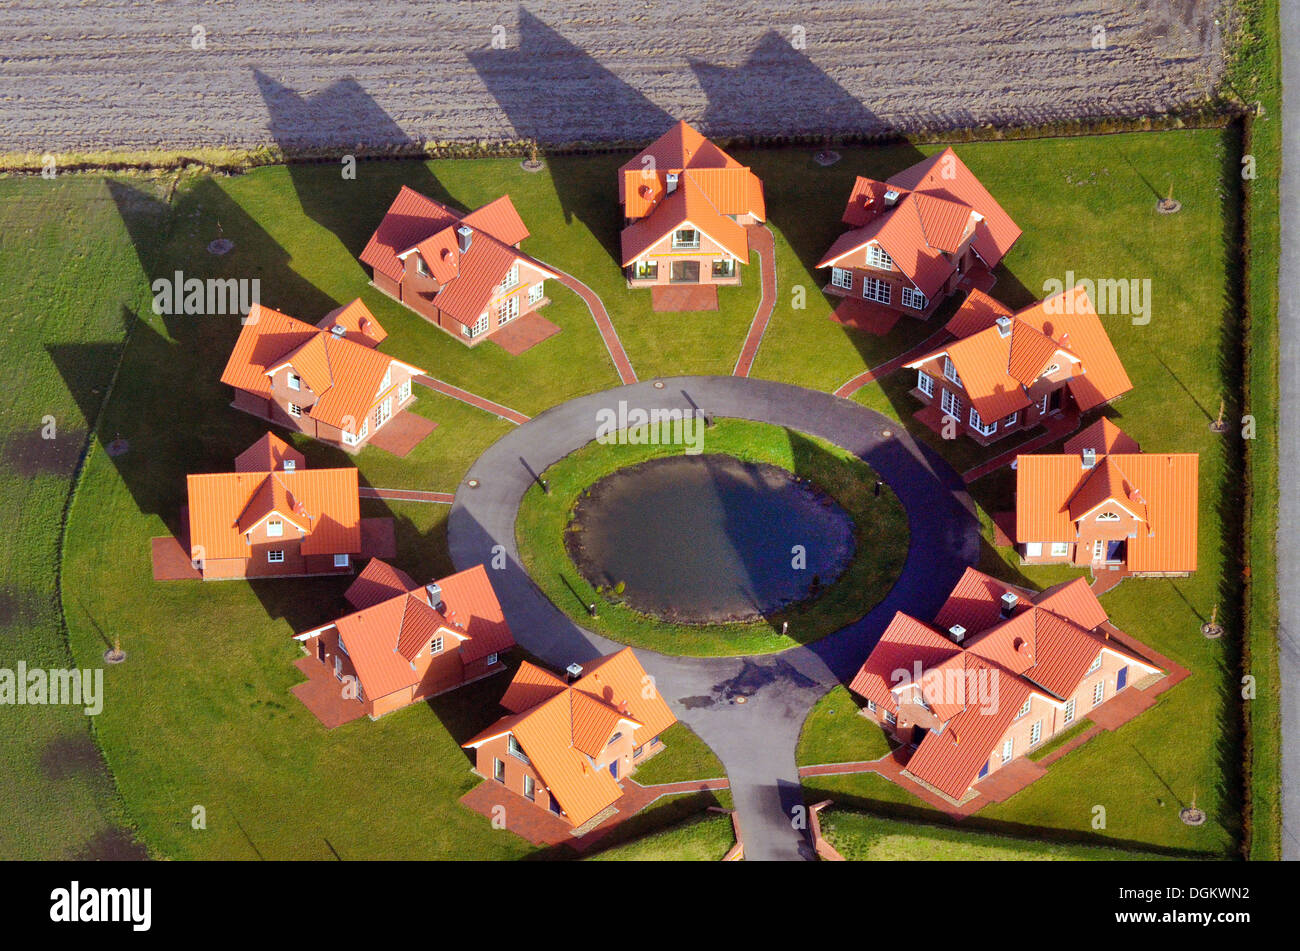 Aerial view, modern rundling, a form of circular village with identical cottages, built in a circle, near Wilhelmshaven Stock Photo